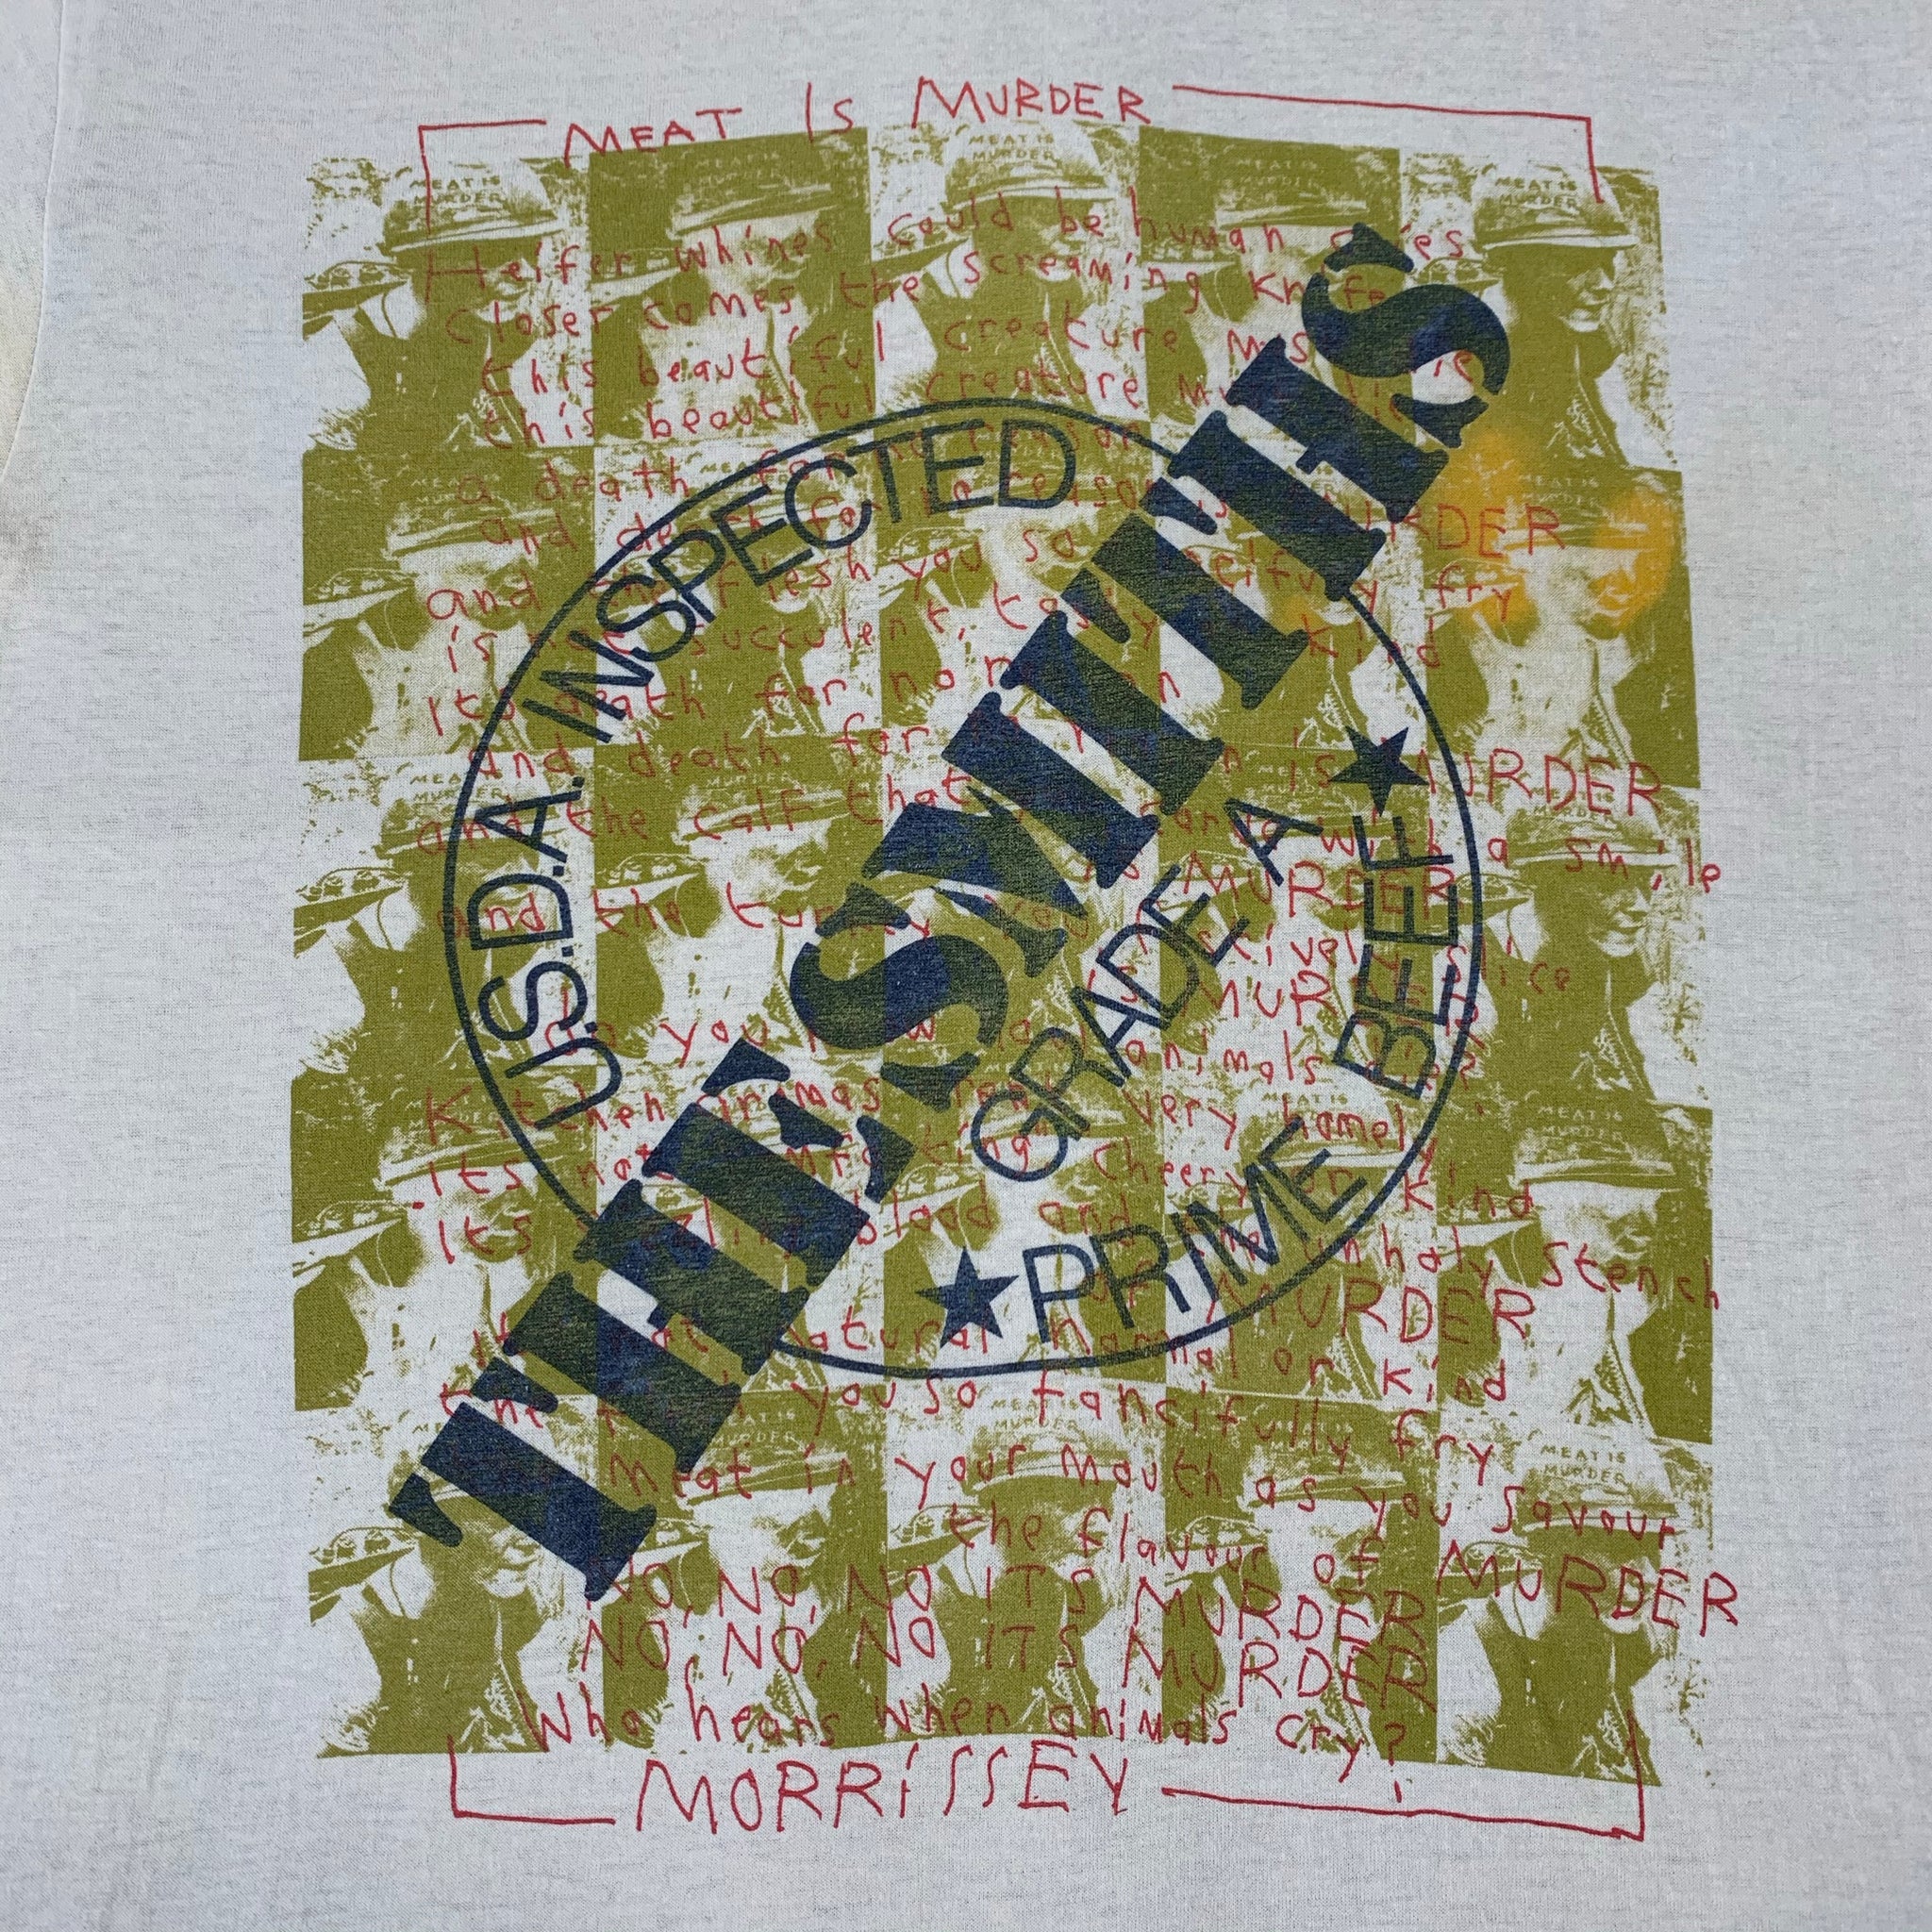 Vintage The Smiths “Meat Is Murder” T-Shirt | jointcustodydc